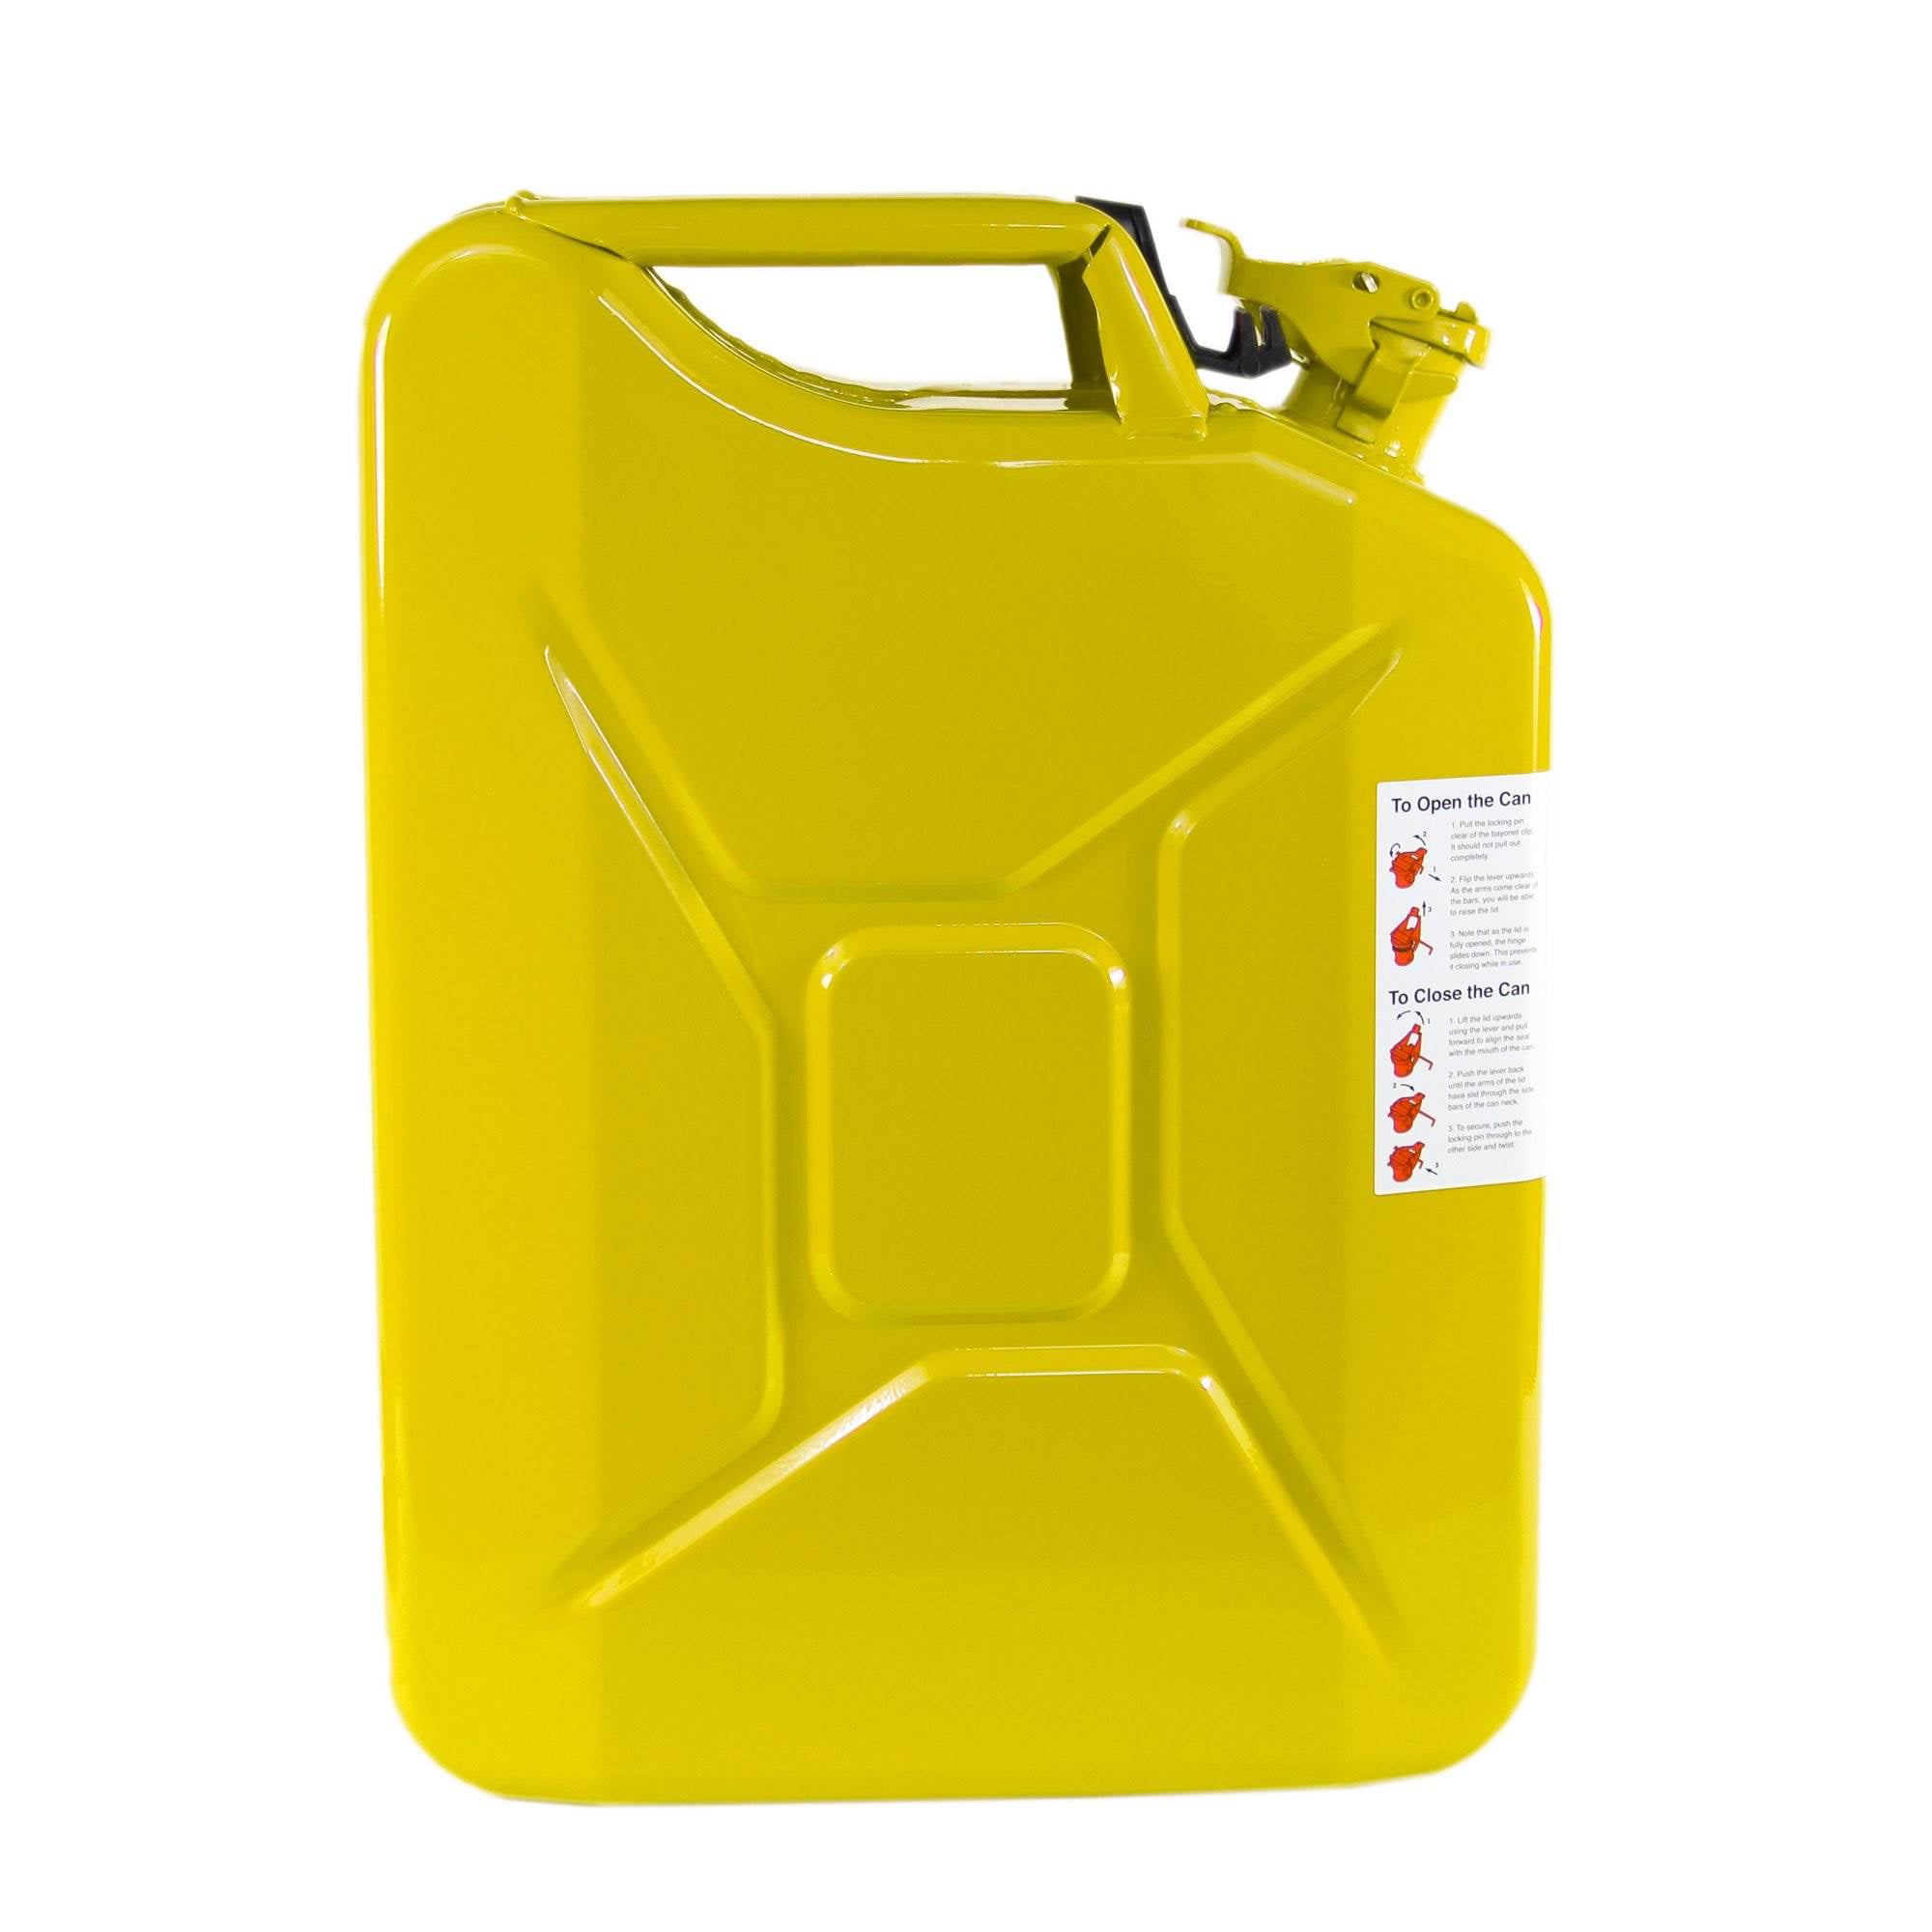 Wavian 3011 5.3 Gallon Authentic Carb Fuel Jerry Can Yellow for sale online 